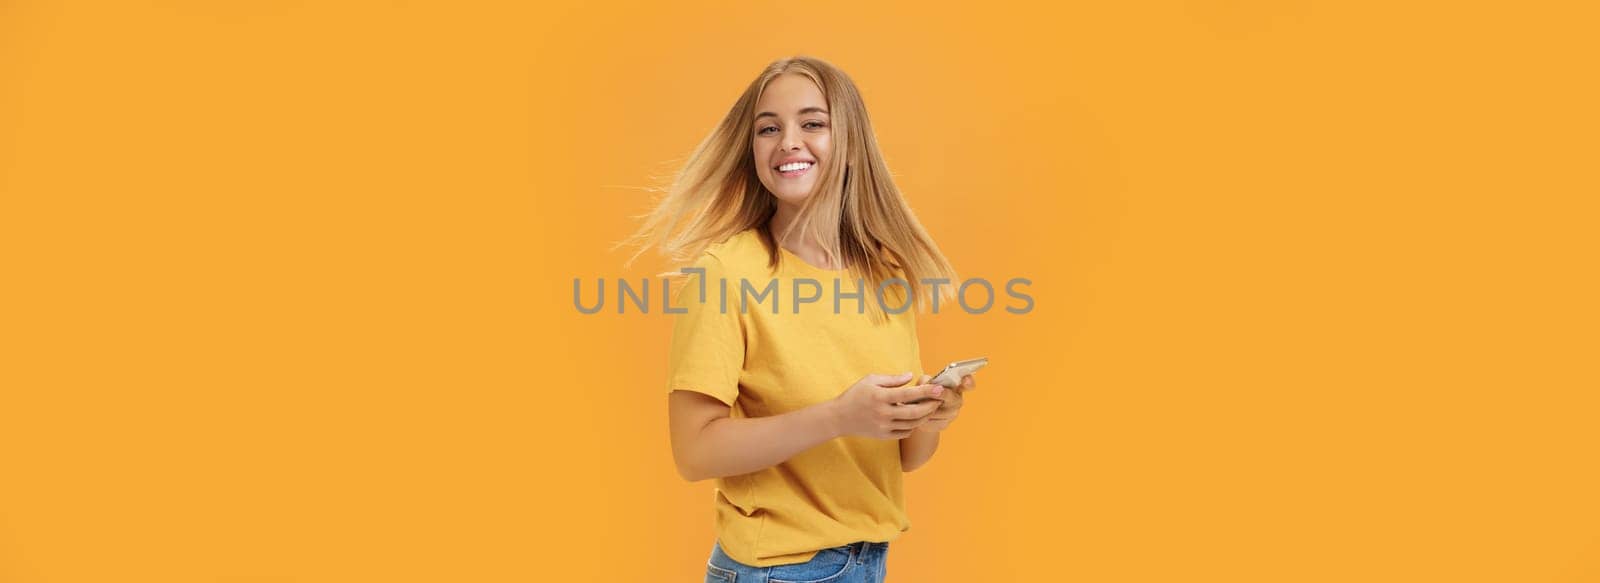 Girl feeling happy receiving message from him. Portrait of carefree charming woman with new haircut waving head standing half-turned, turning to camera with pleased cute smile holding smartphone. Emotions and technology concept